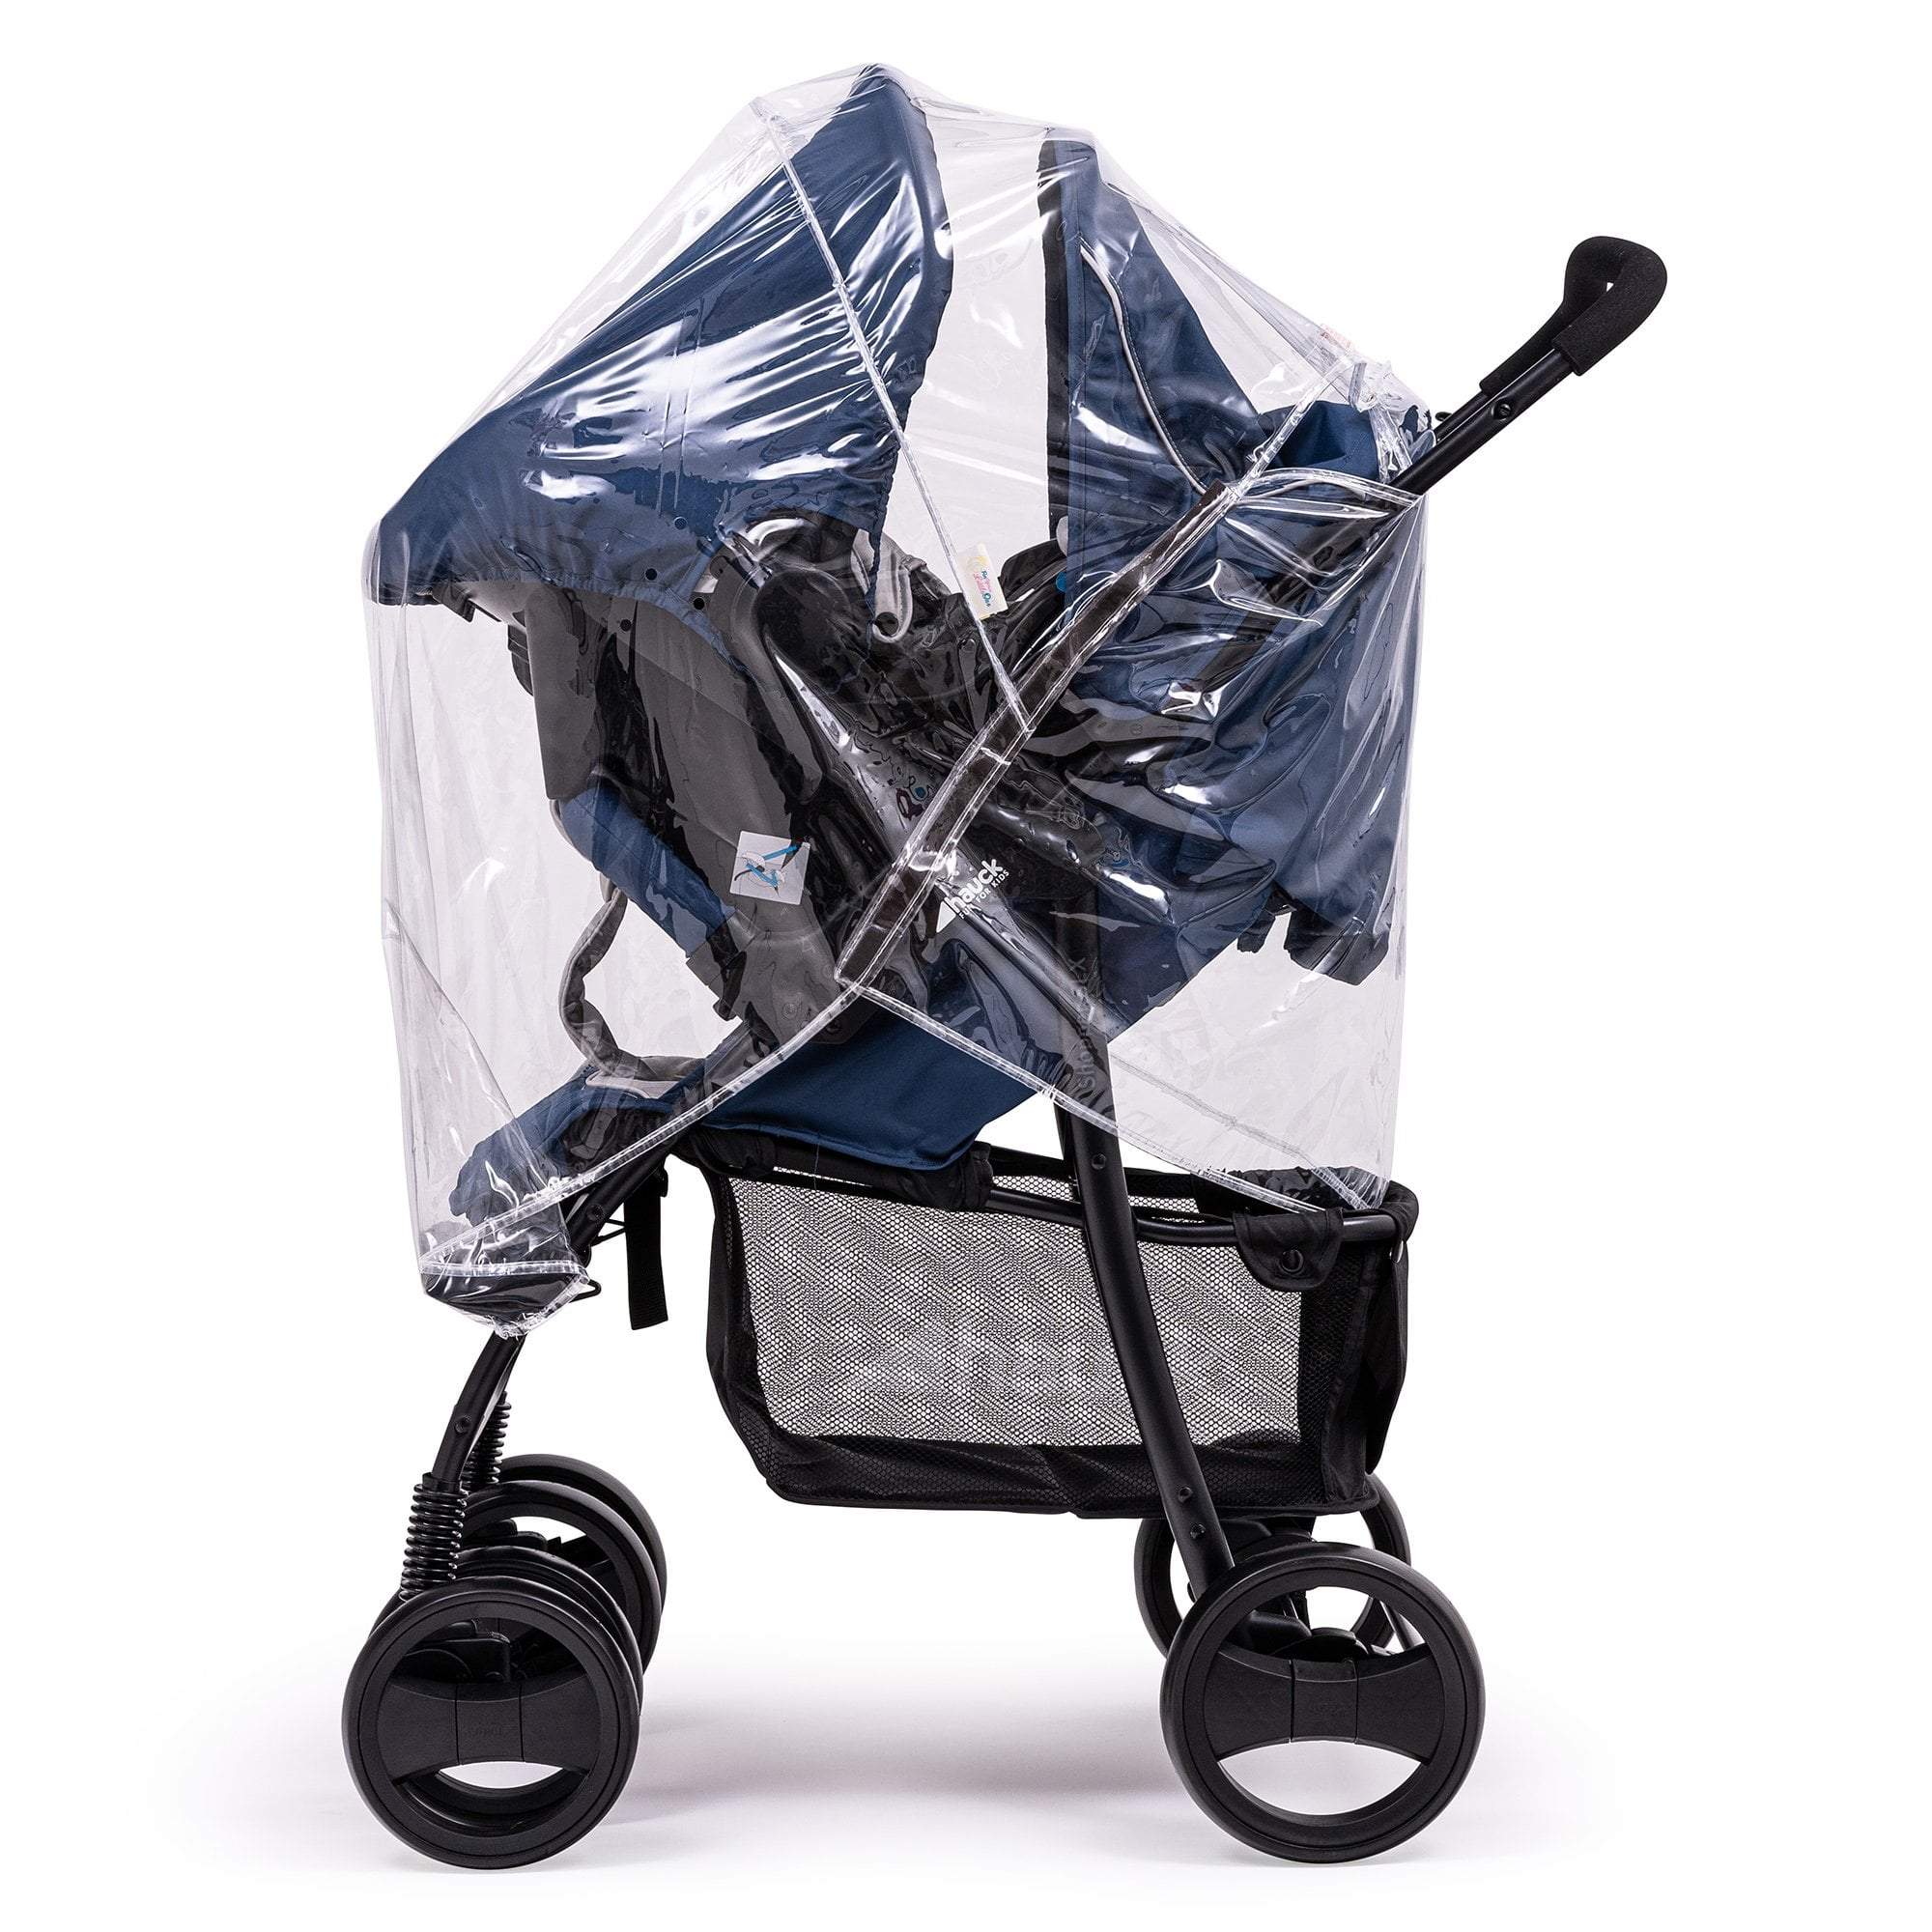 Travel System Raincover Compatible with Infababy - Fits All Models - For Your Little One